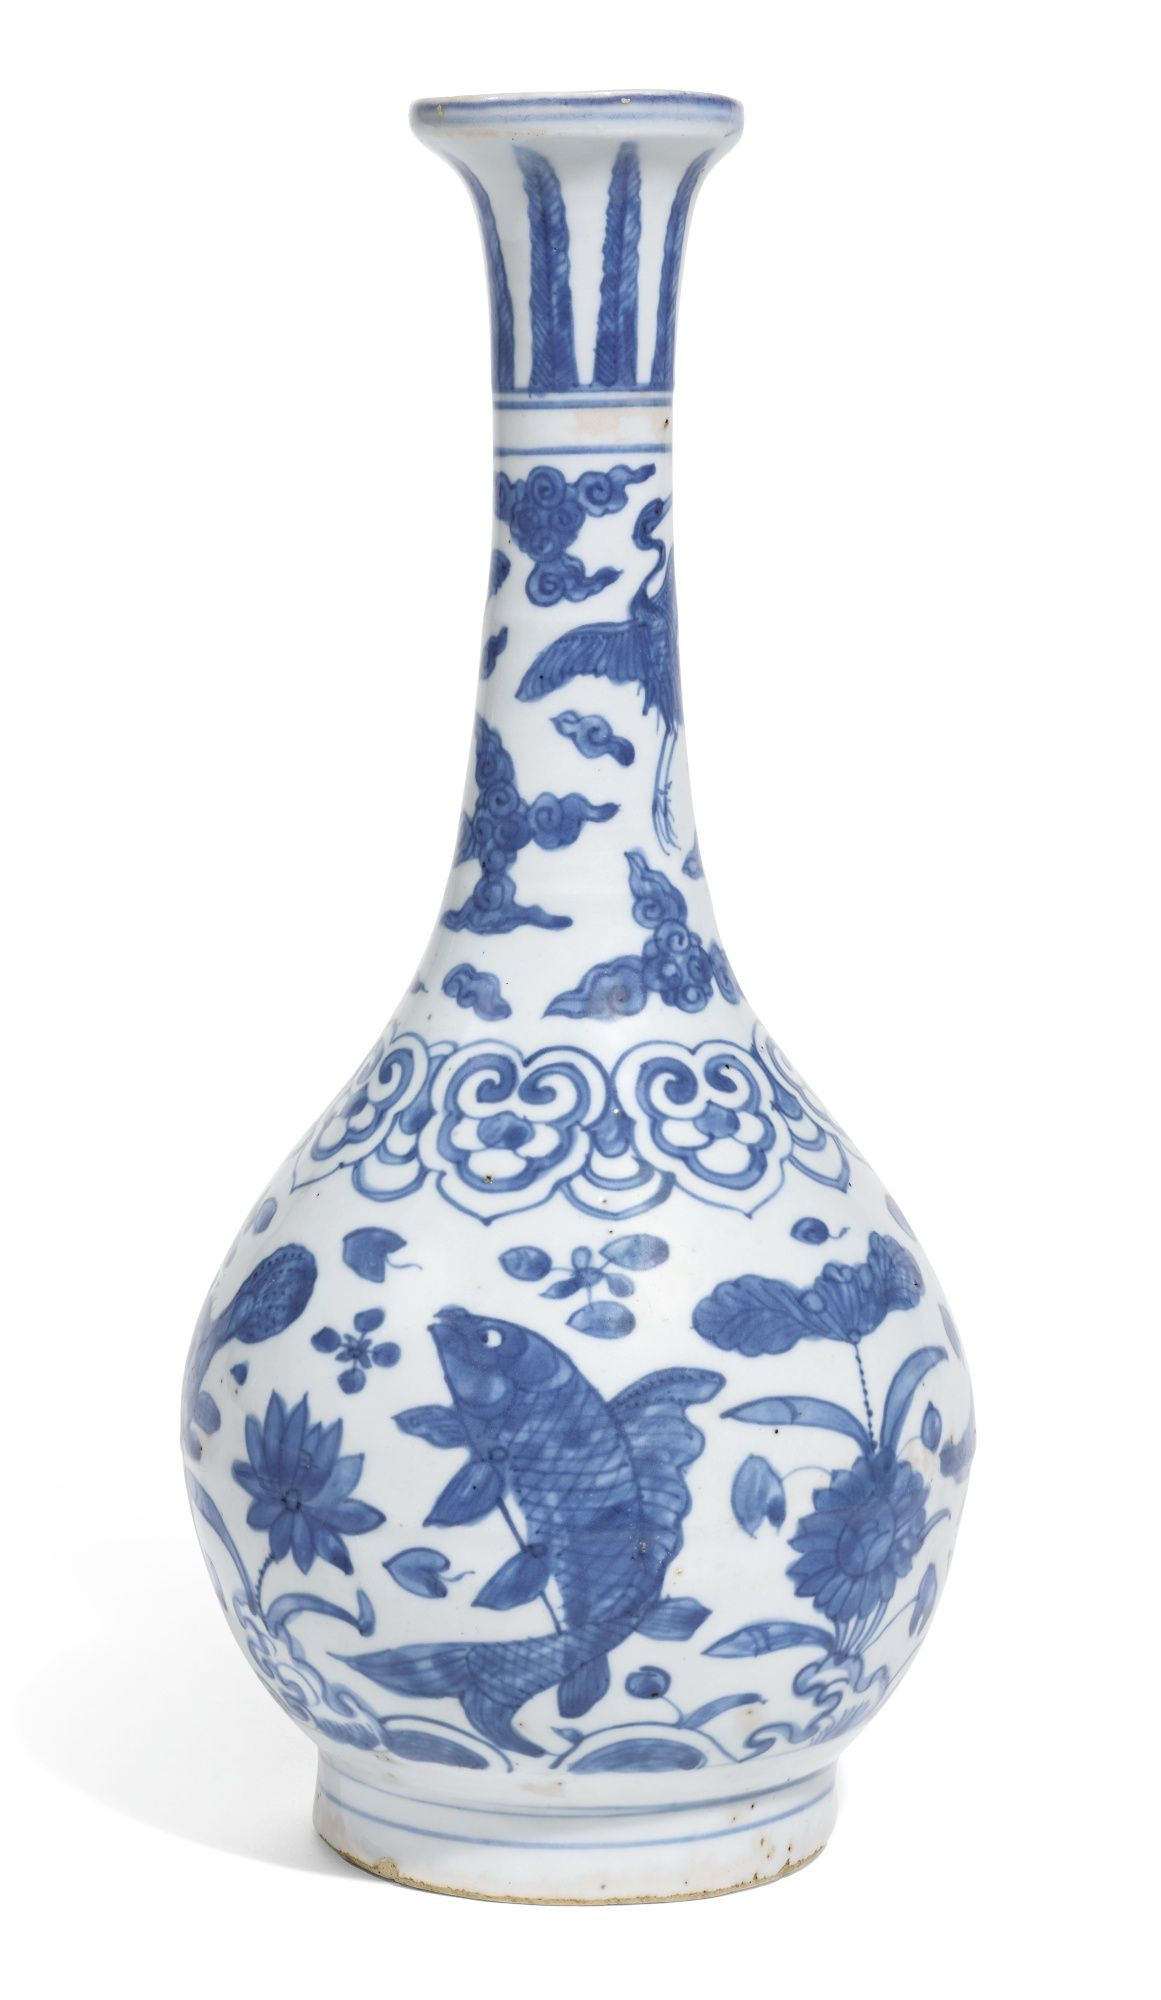 modern blue vase of a blue and white bottle vase ming dynasty jiajing wanli period in a blue and white bottle vase ming dynasty jiajing wanli period